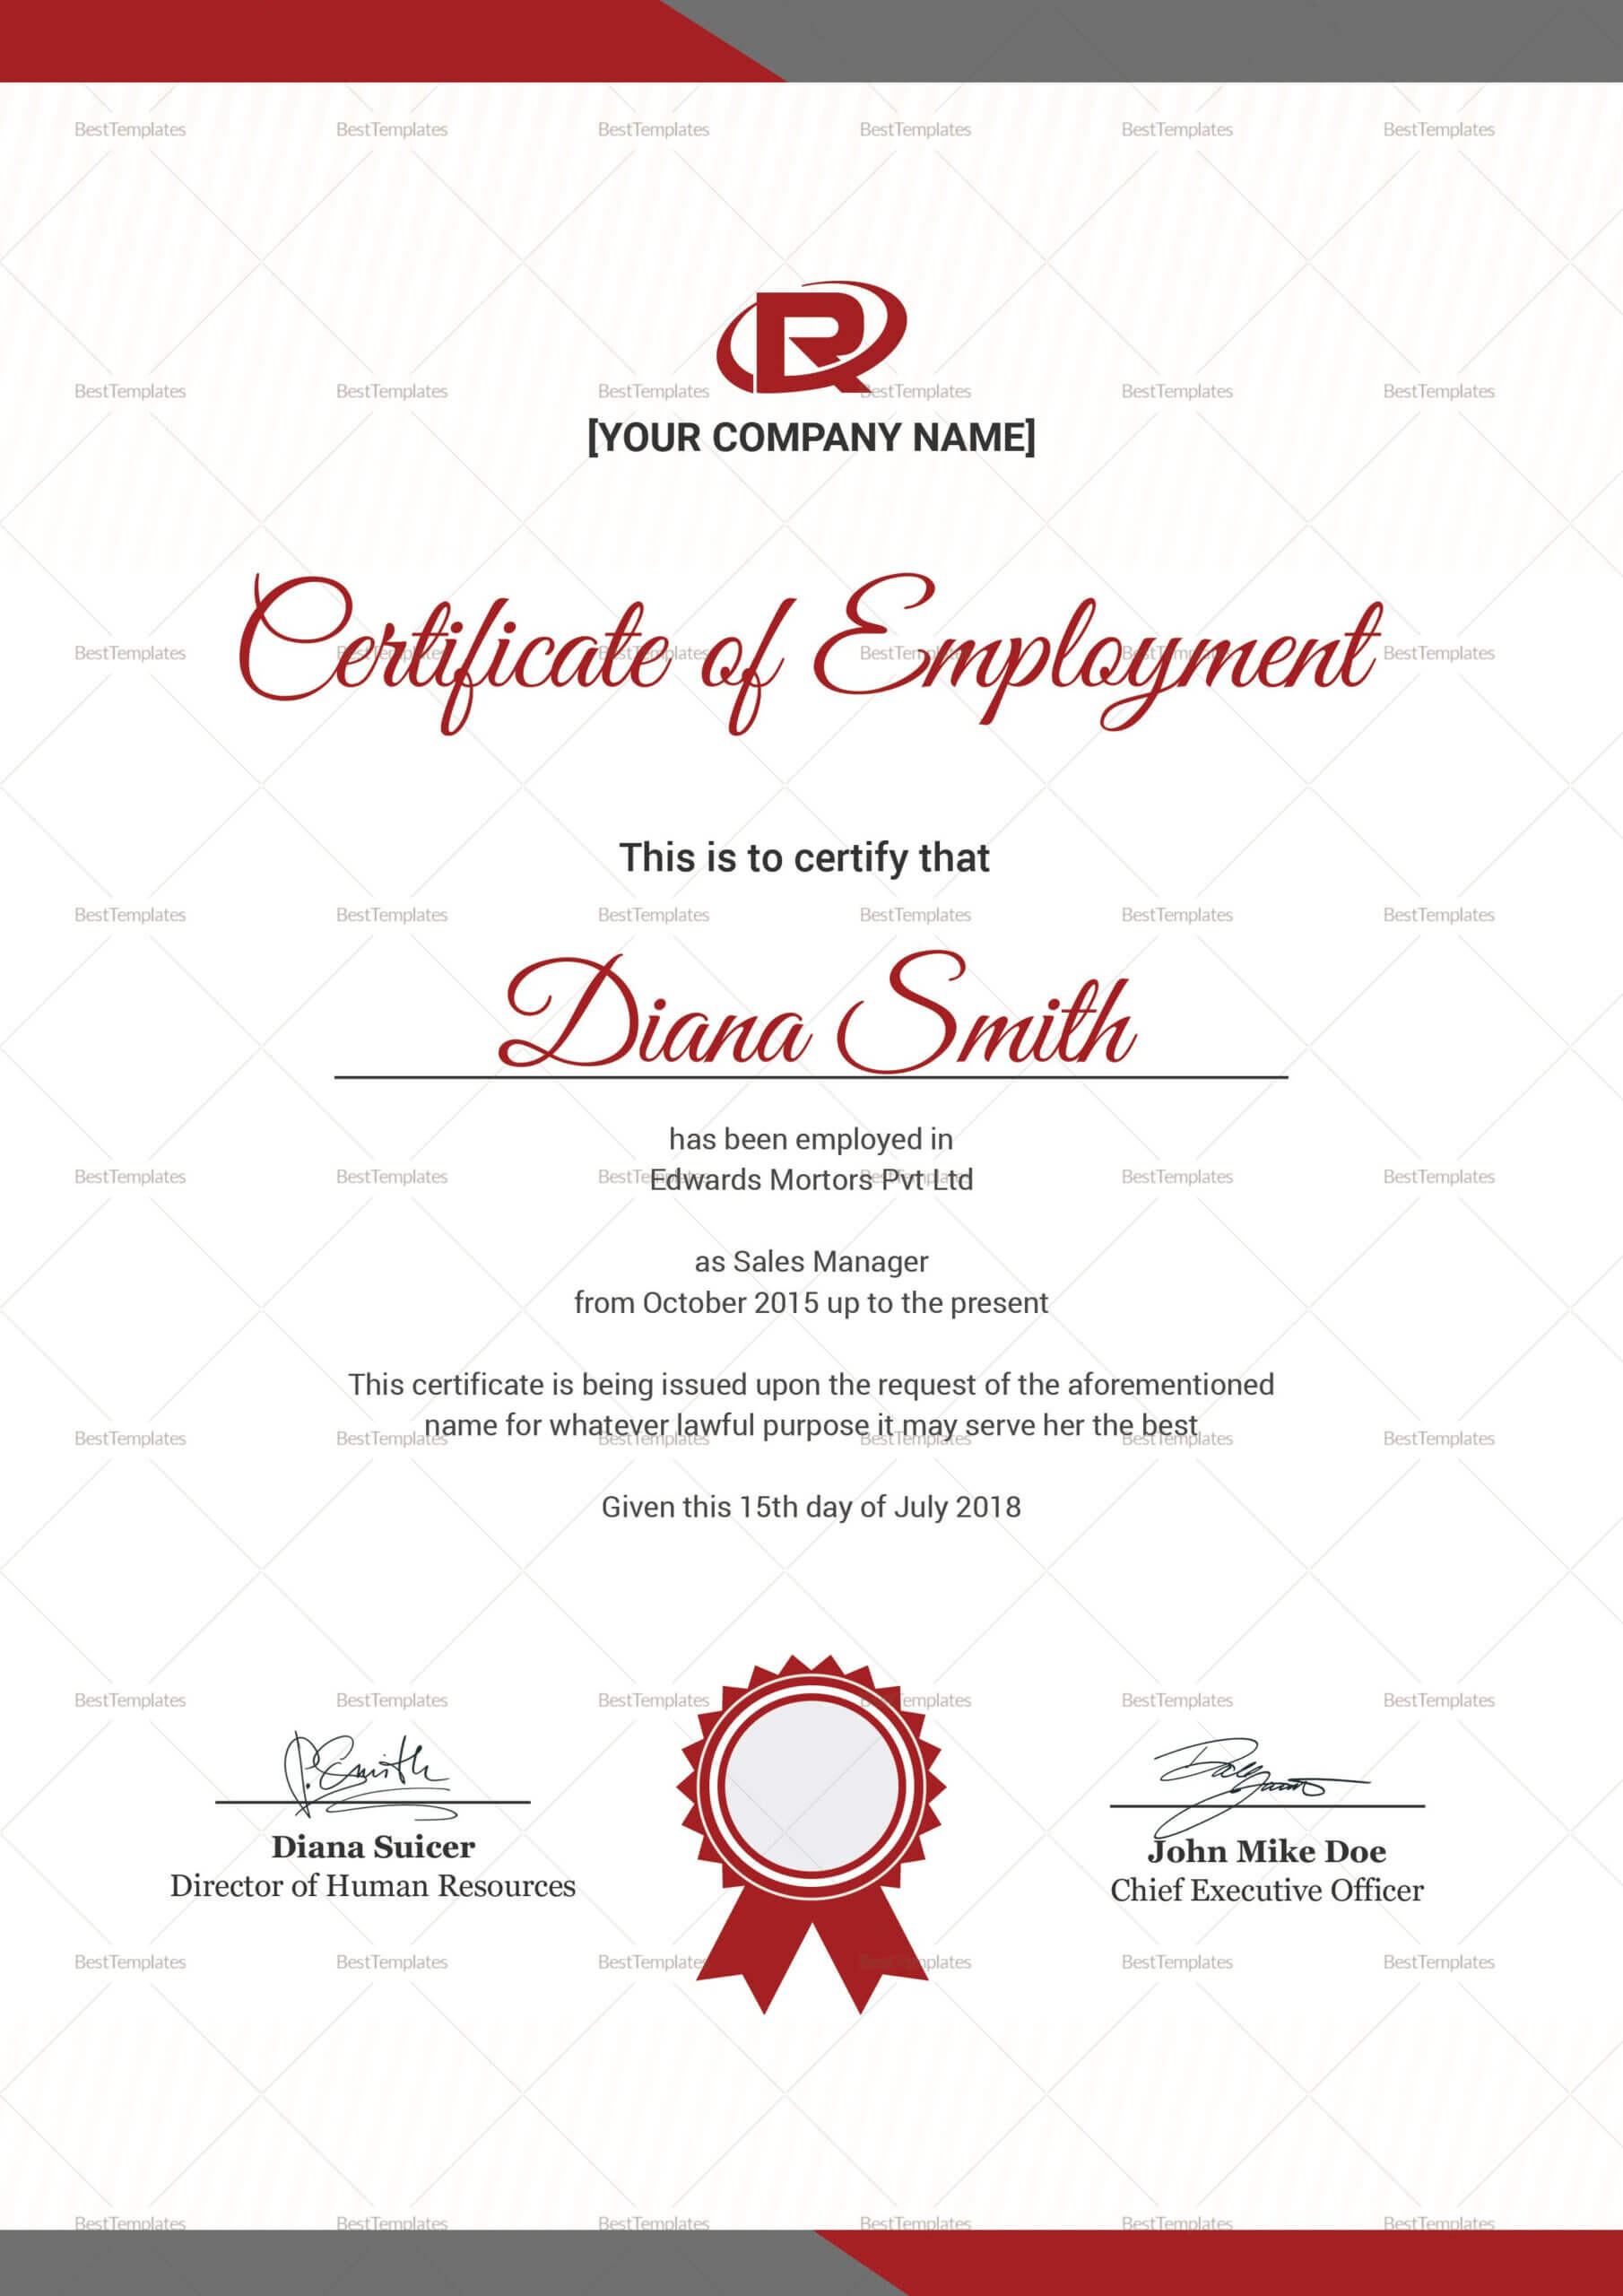 Productive Employment Certificate Template | Certificate Regarding Sales Certificate Template